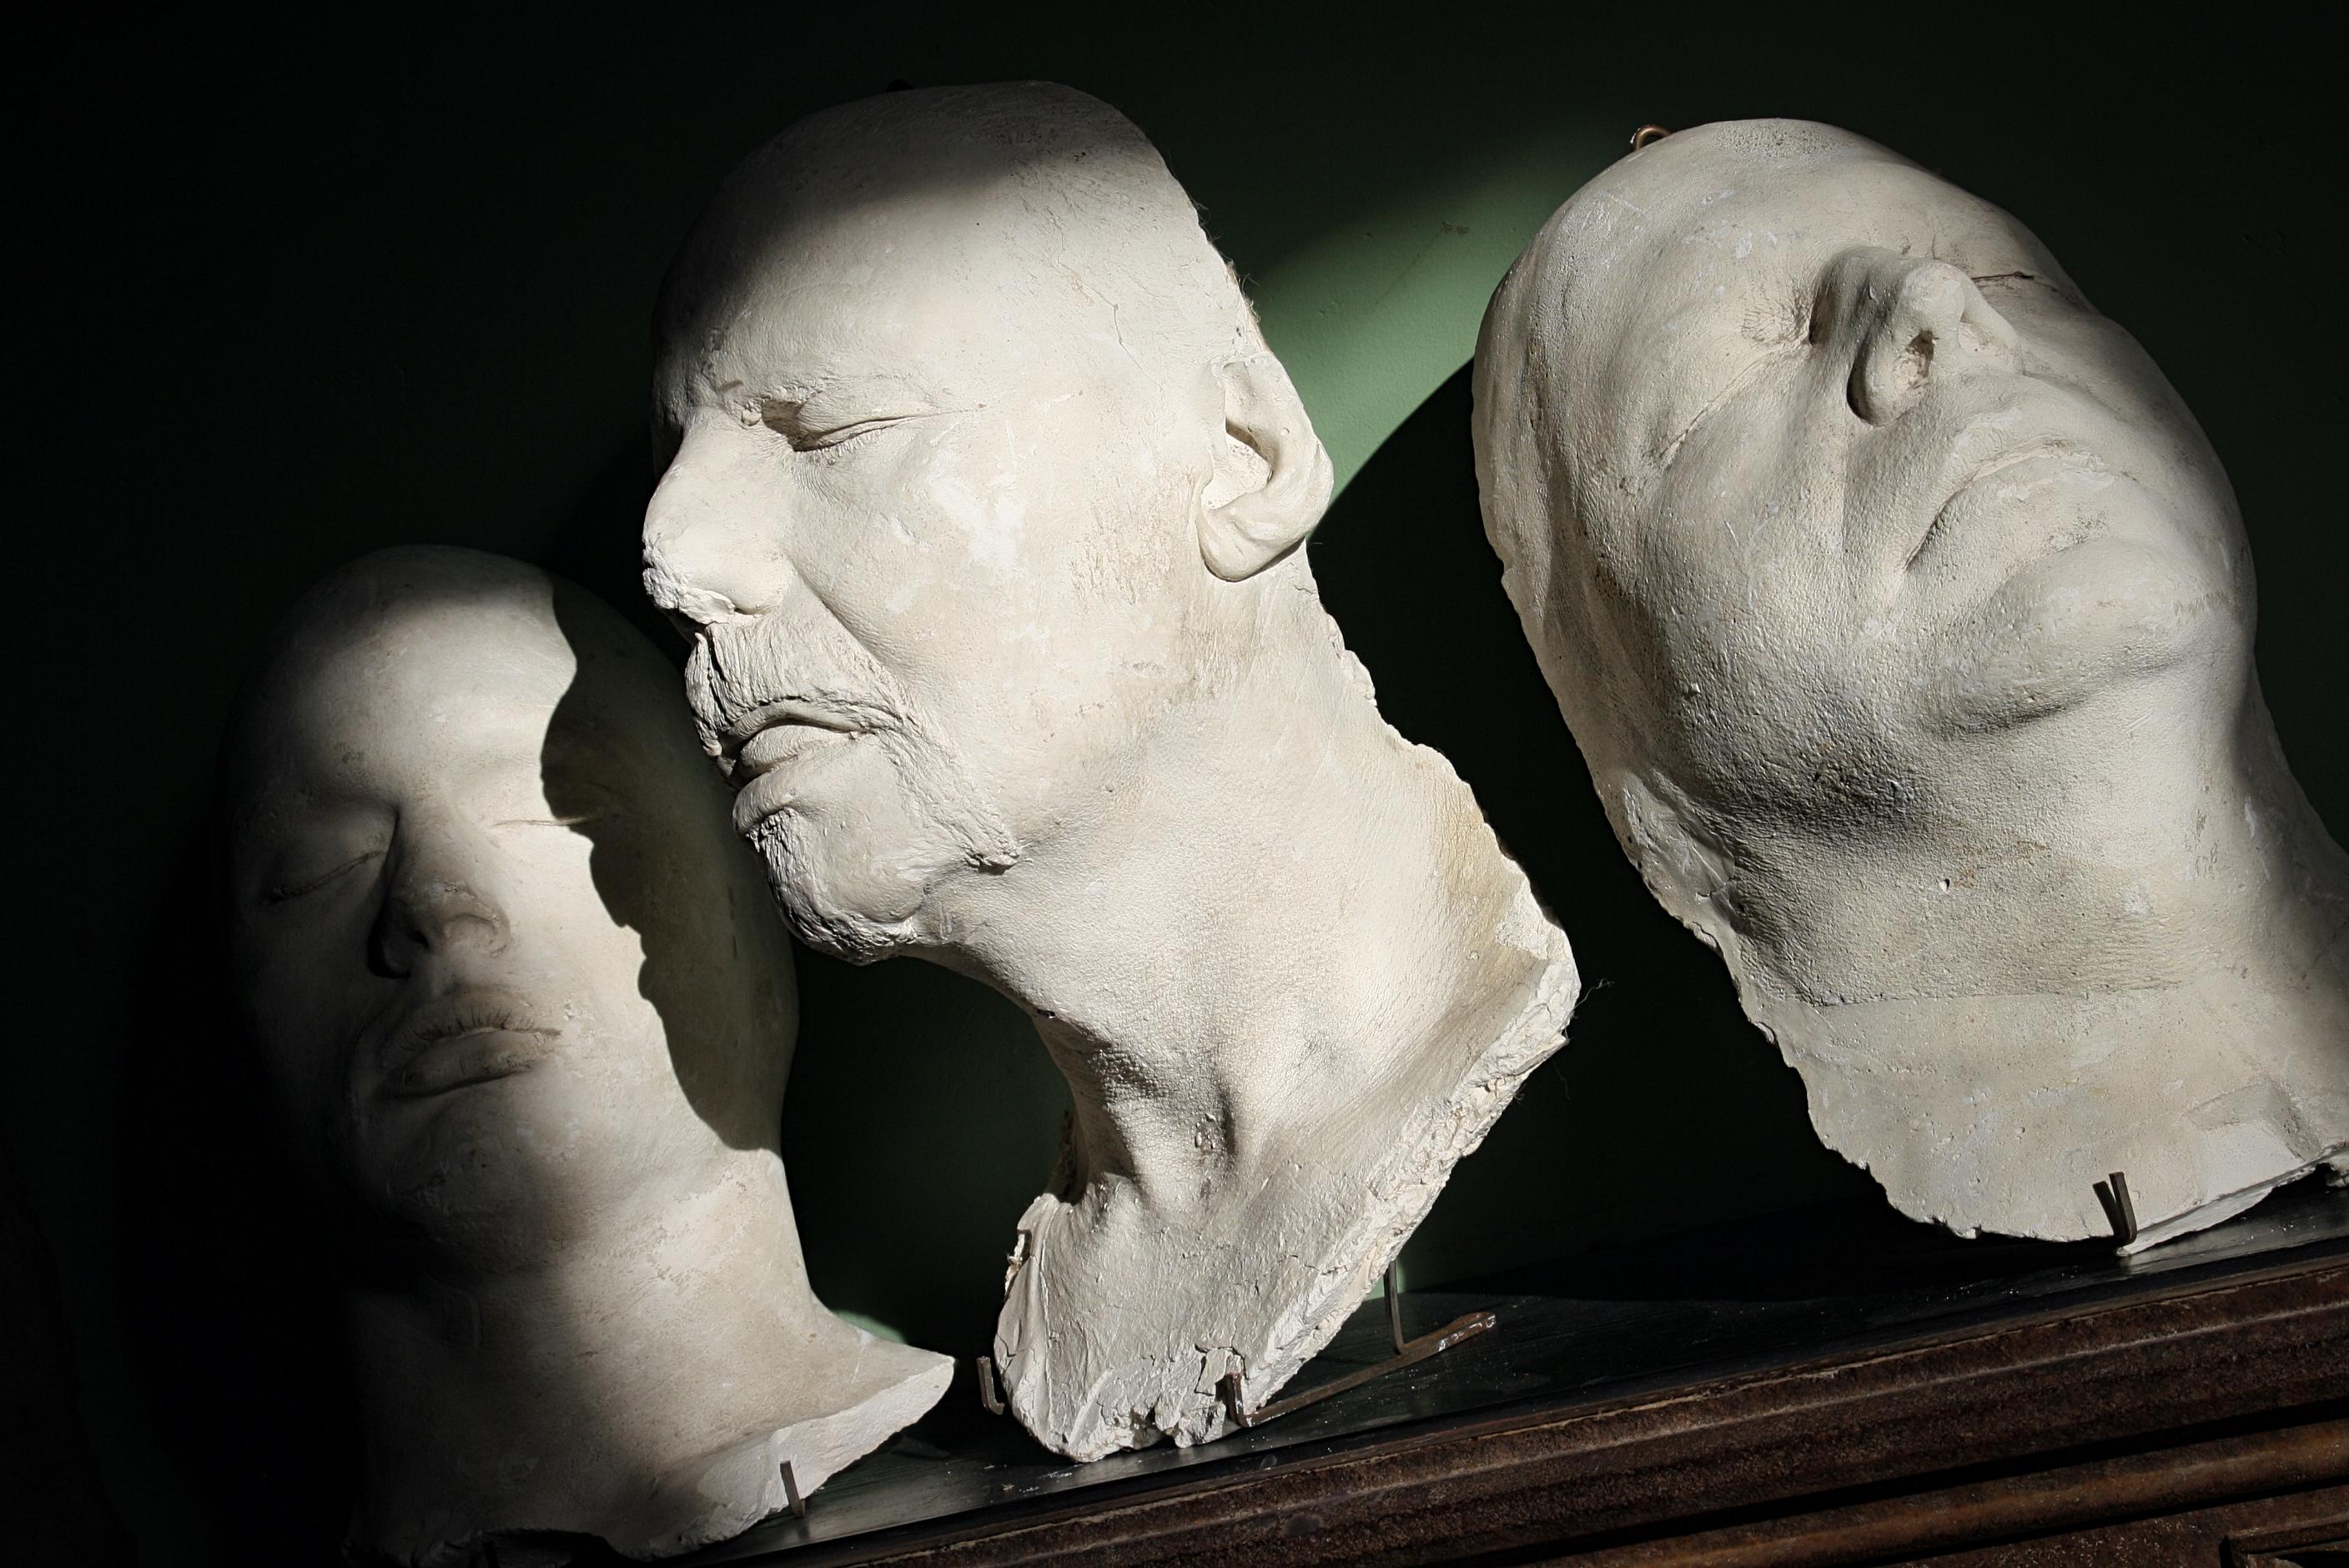 A trio of late 19th century death masks, a thick plaster form taken from the deceased the technique was used prior advent of photography. Often used for the famous individuals to maintain a record of their faces after death in order to continue